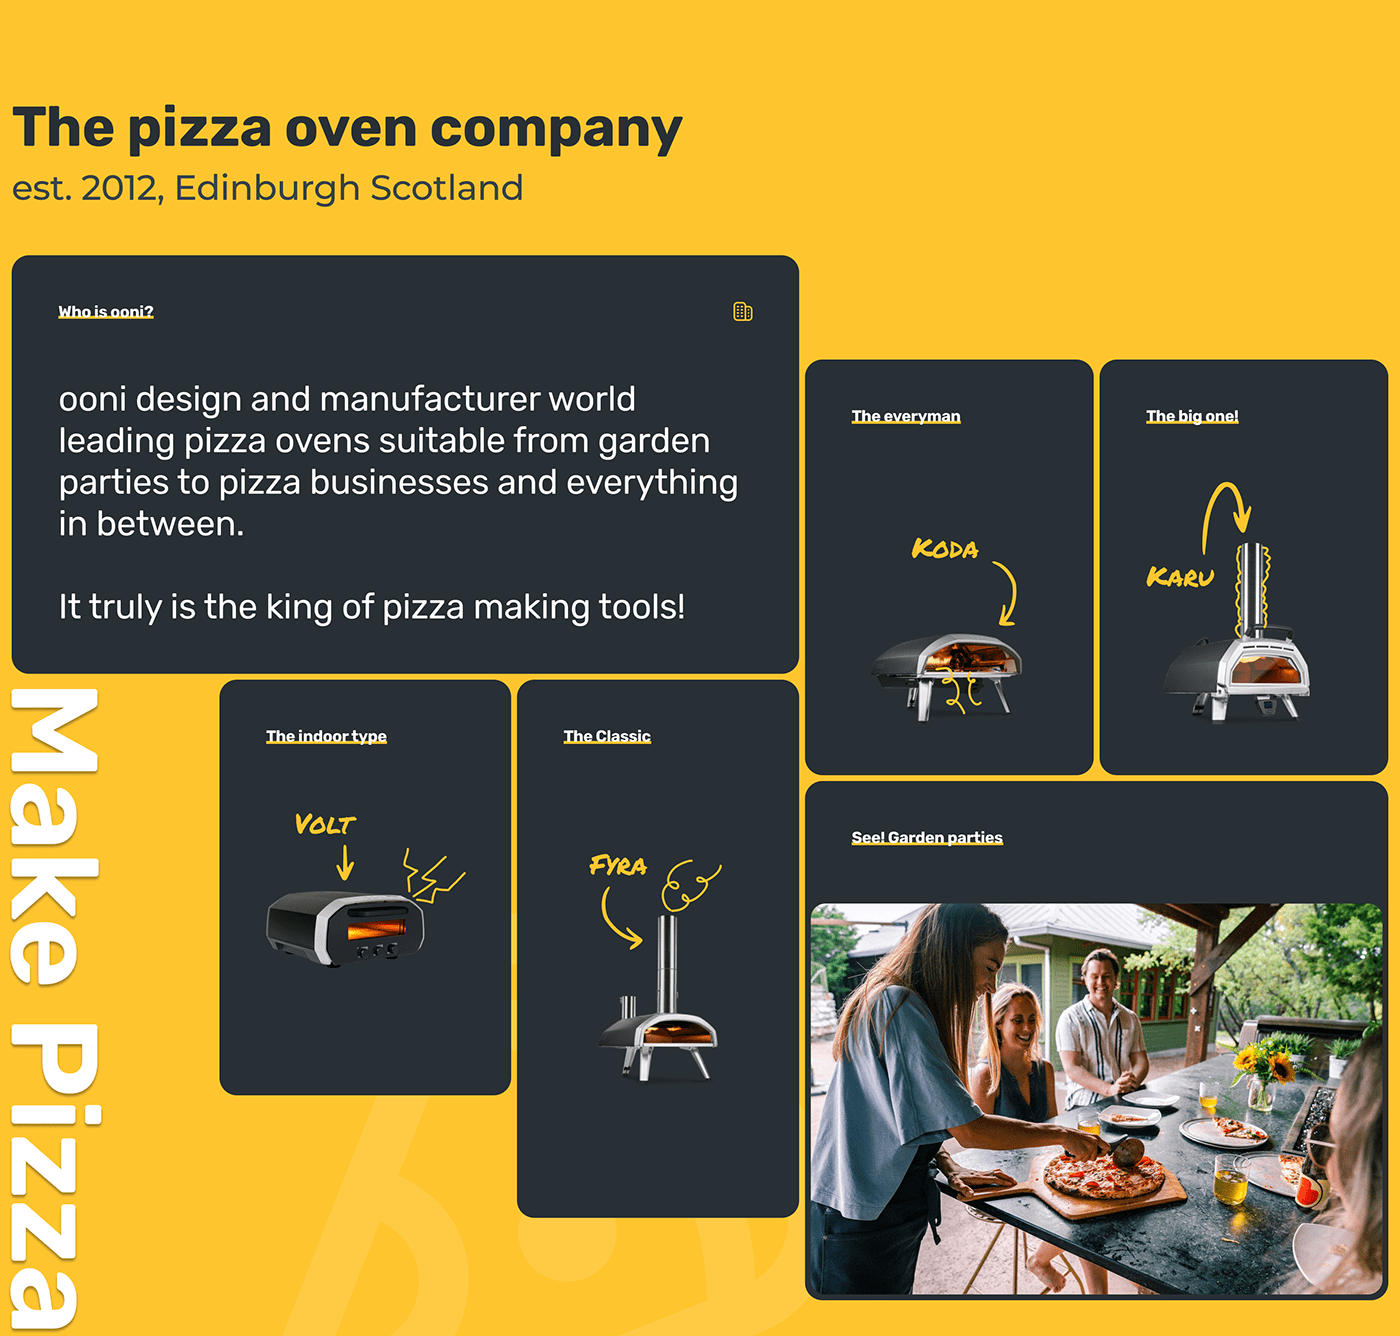 ui design user interface ooni Pizza pizza oven